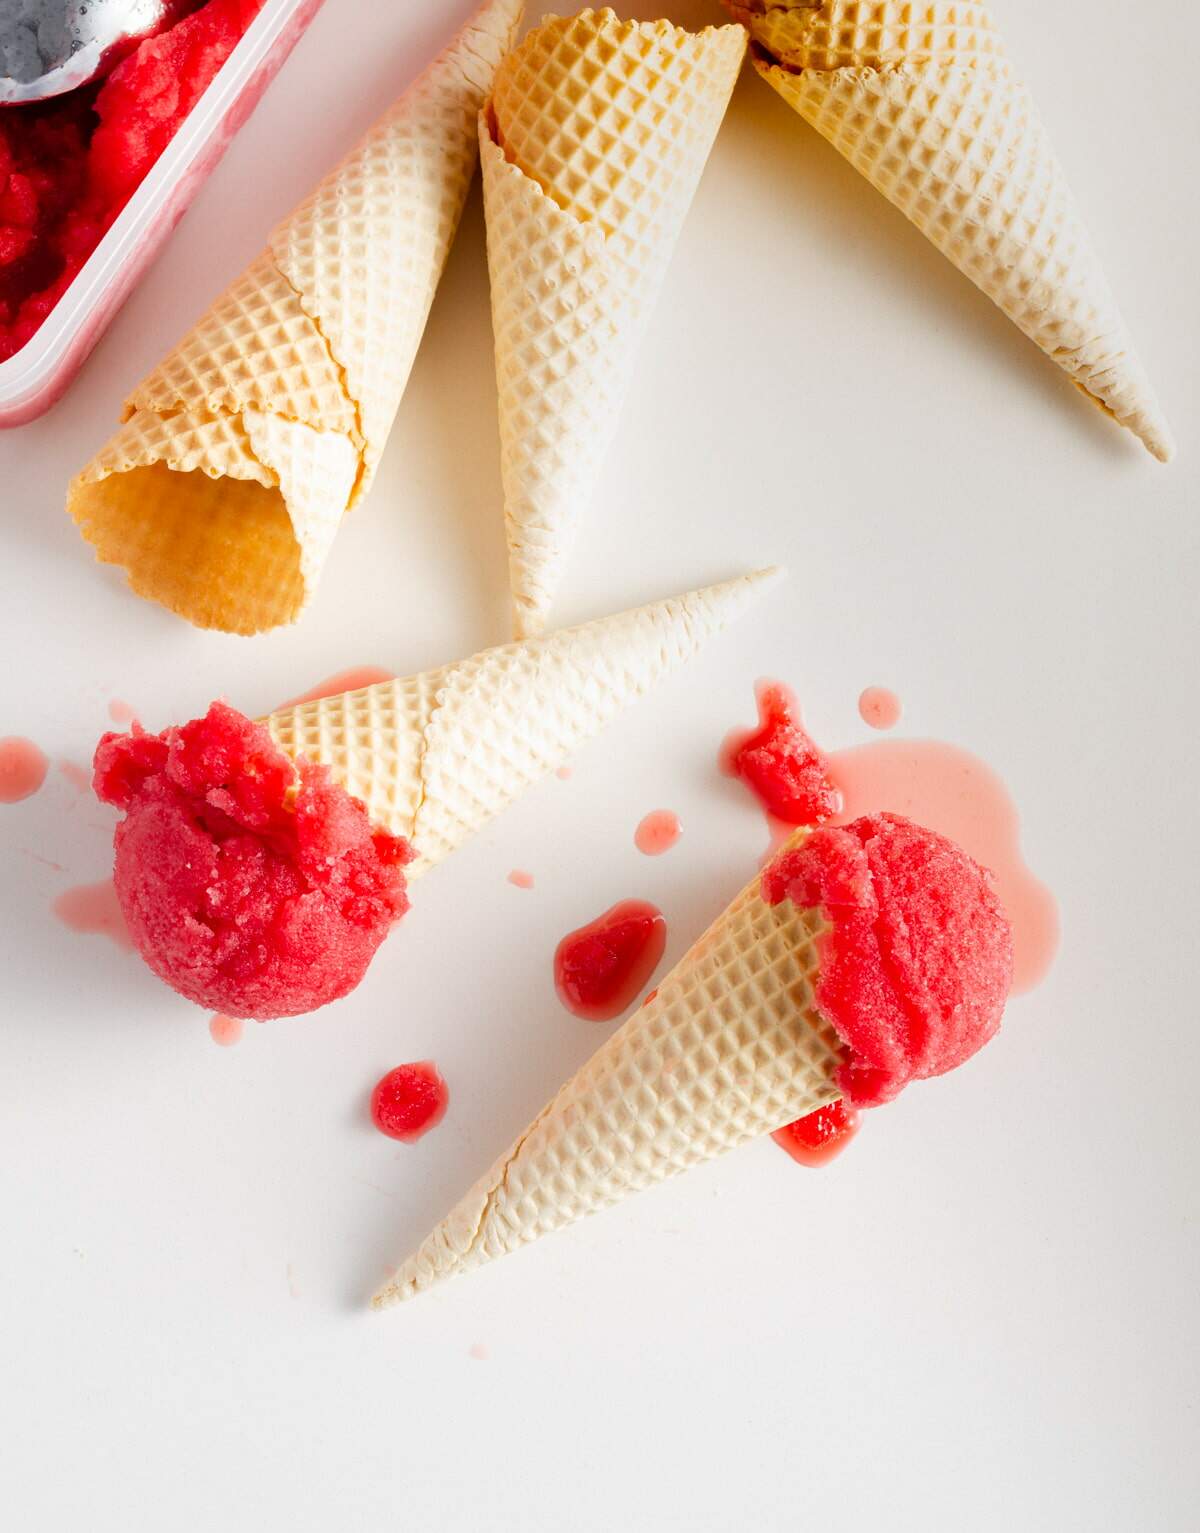 Blood orange sorbet in waffle cones from above with melting sorbet on a white marble surface.